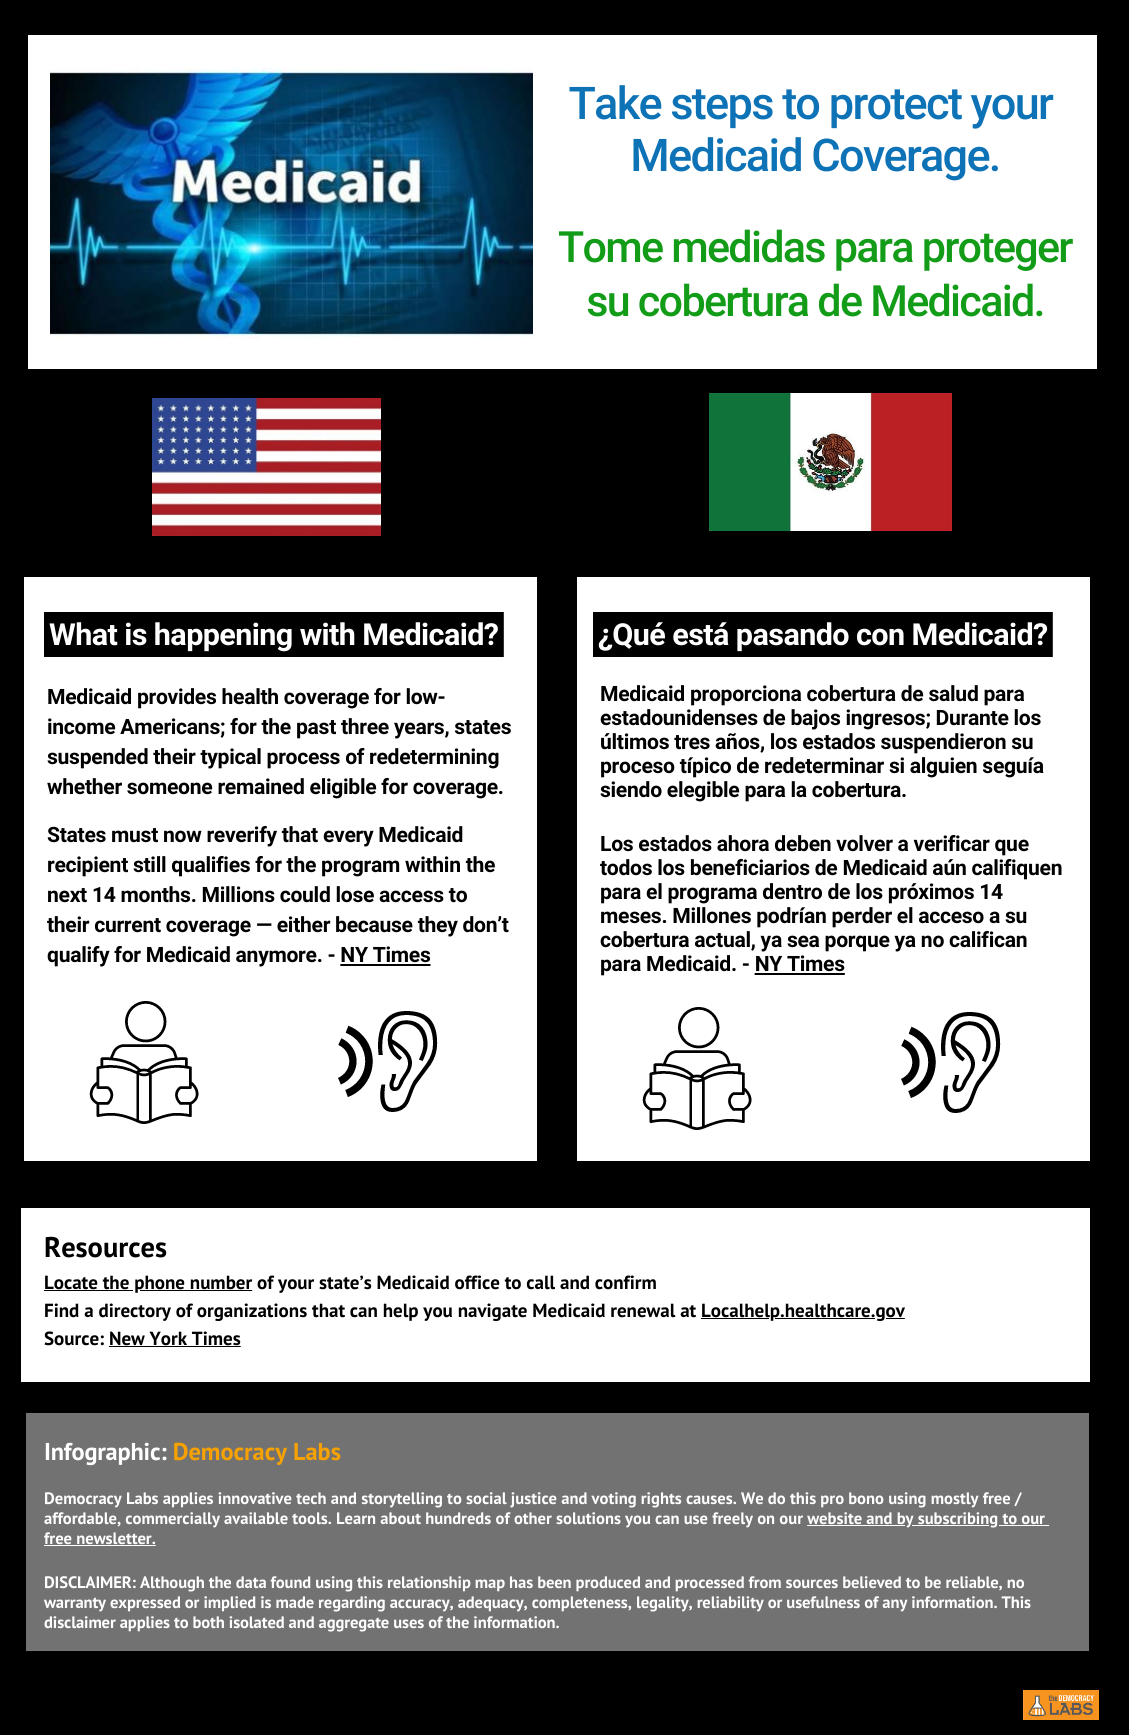 Create audio infographics to reach more people who speak different languages and have different levels of education.